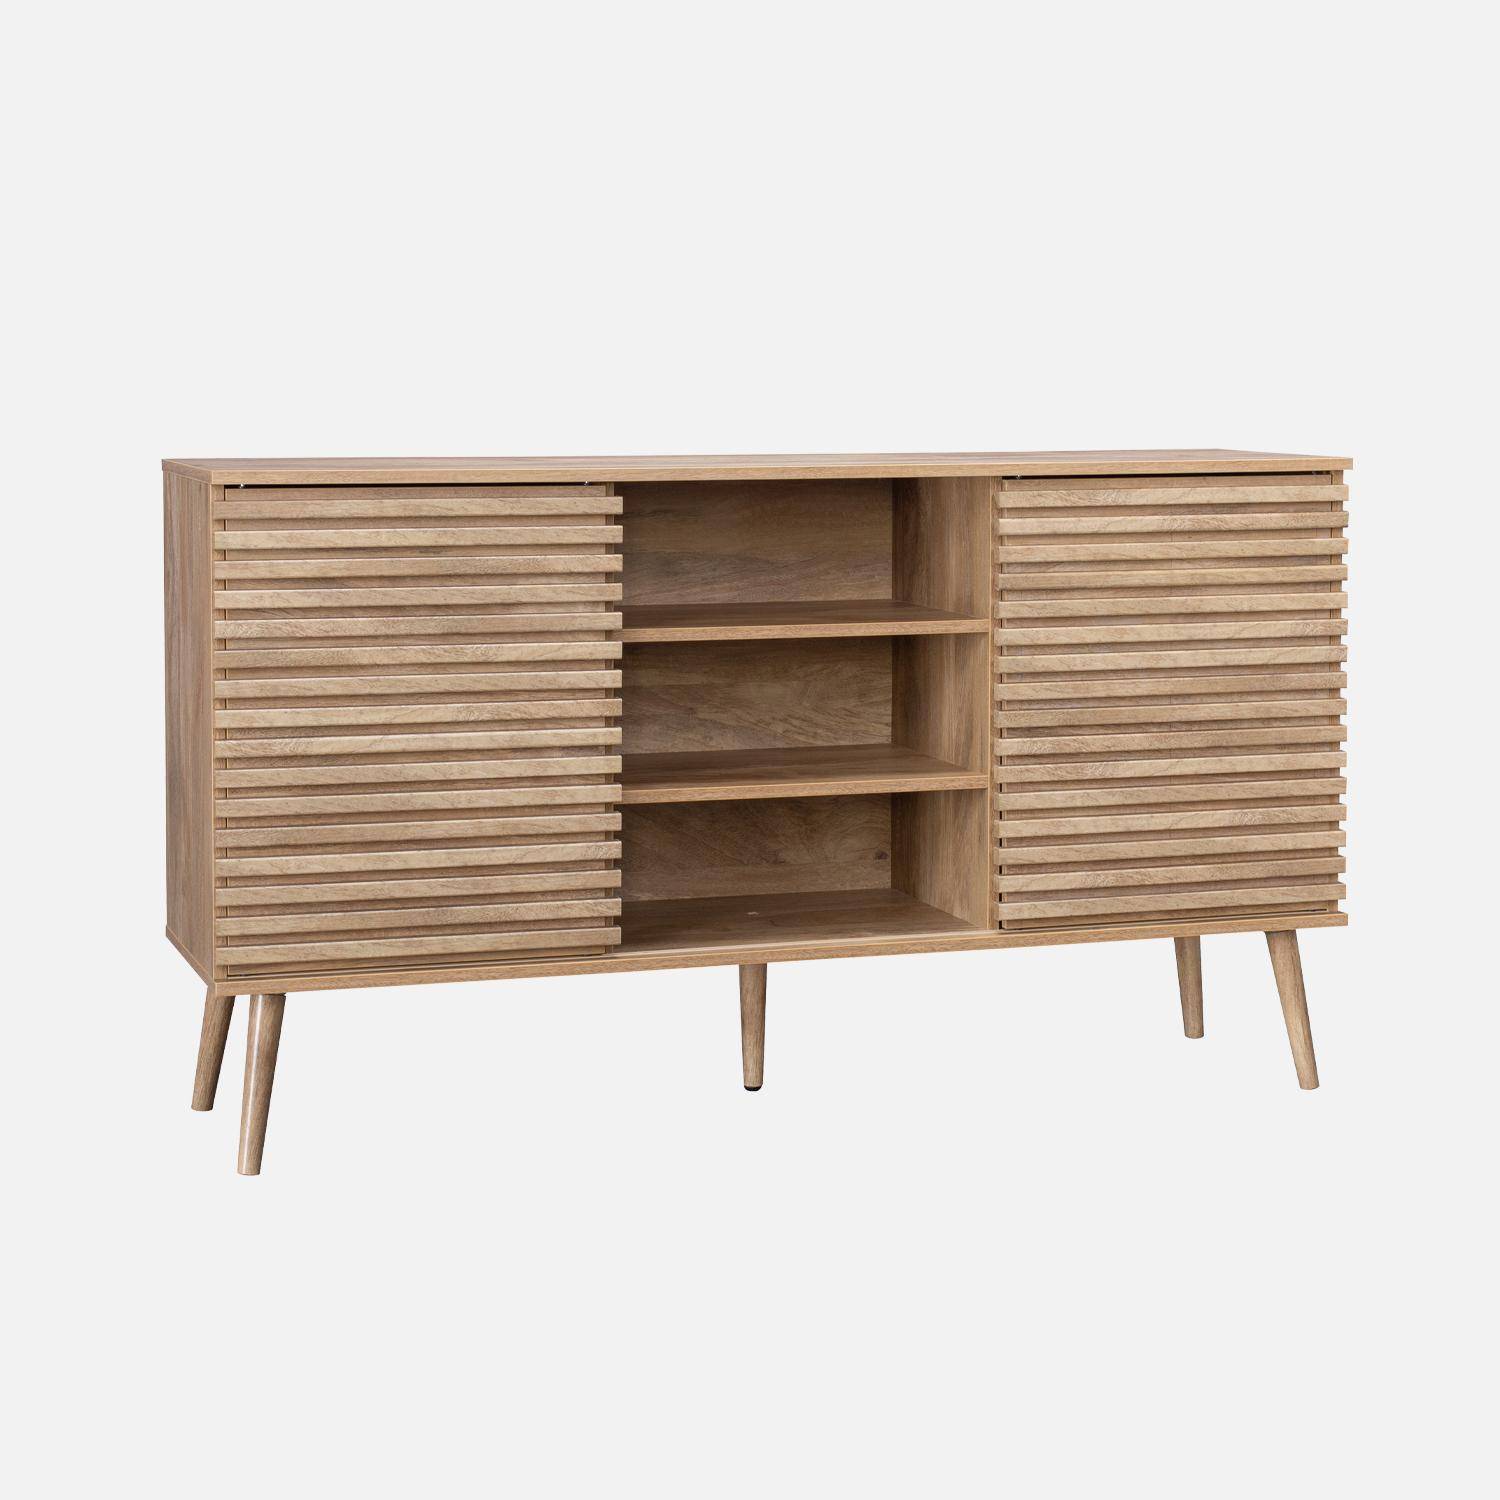 Scandinavian sideboard in wood decor with 2 grooved sliding doors and 4 shelves L 140,sweeek,Photo4